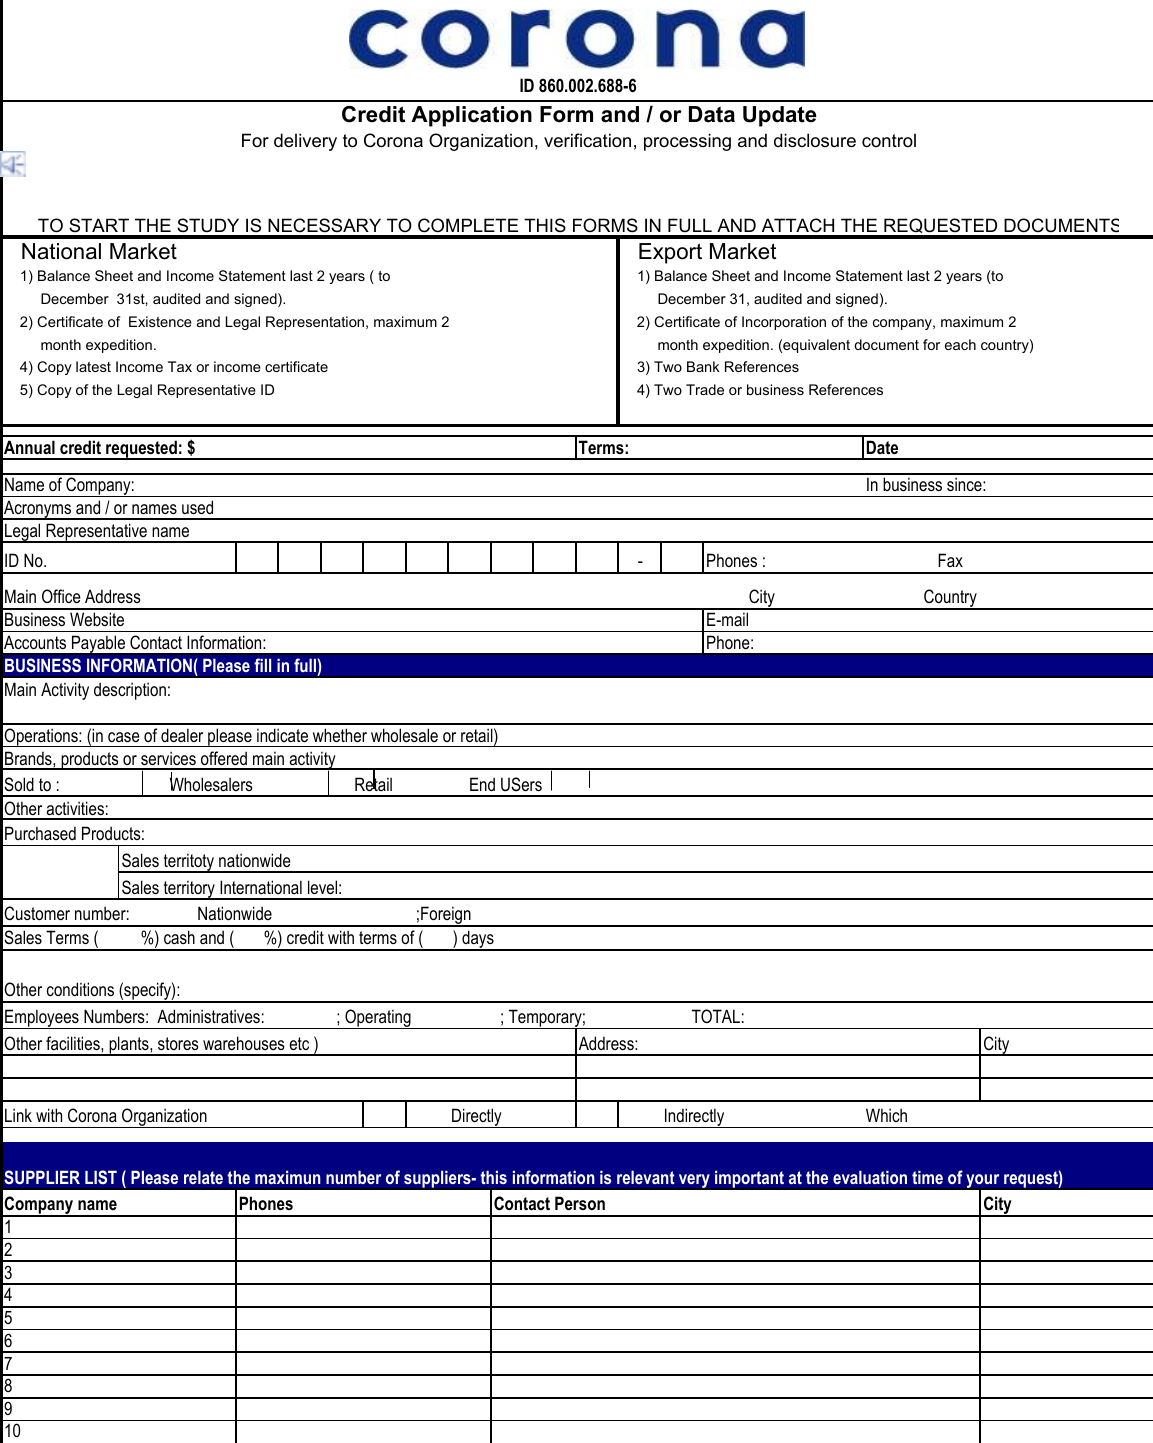 Page 1 of 2 - Credit Application Form  Credit-Application-Form